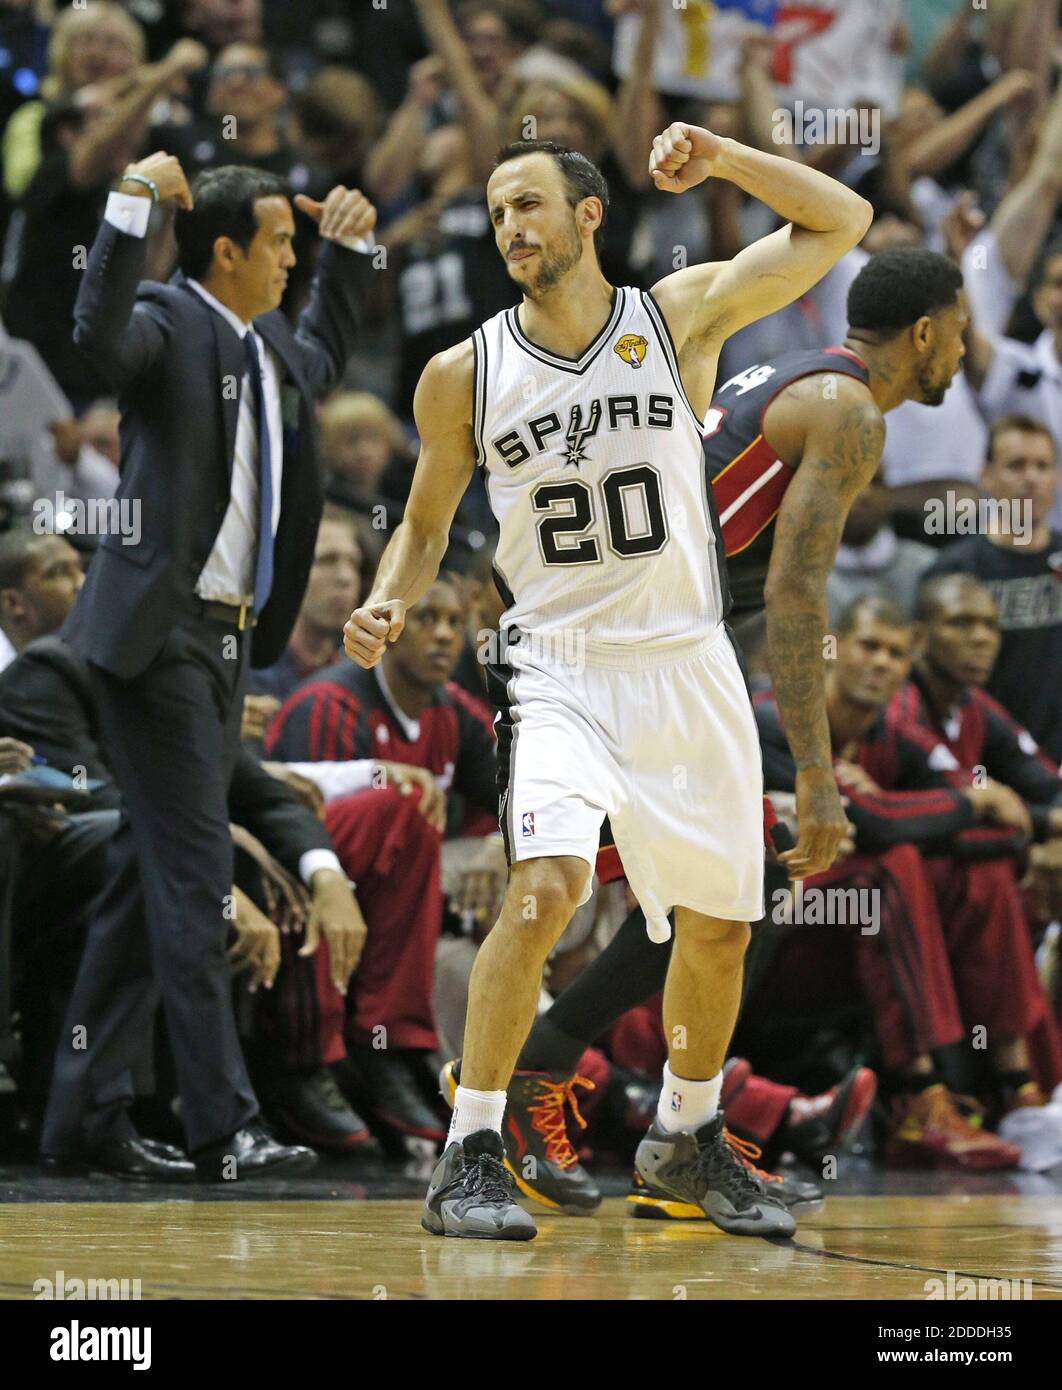 NO FILM, NO VIDEO, NO TV, NO DOCUMENTARY - San Antonio Spurs Manu Ginobili celebrates after hitting a three pointer in the third quarter in Game 5 of the NBA Finals at the AT&T Center in San Antonio, TX, USA, on Sunday, June 15, 2014. Photo by Al Diaz/Miami Herald/MCT/ABACAPRESS.COM Stock Photo